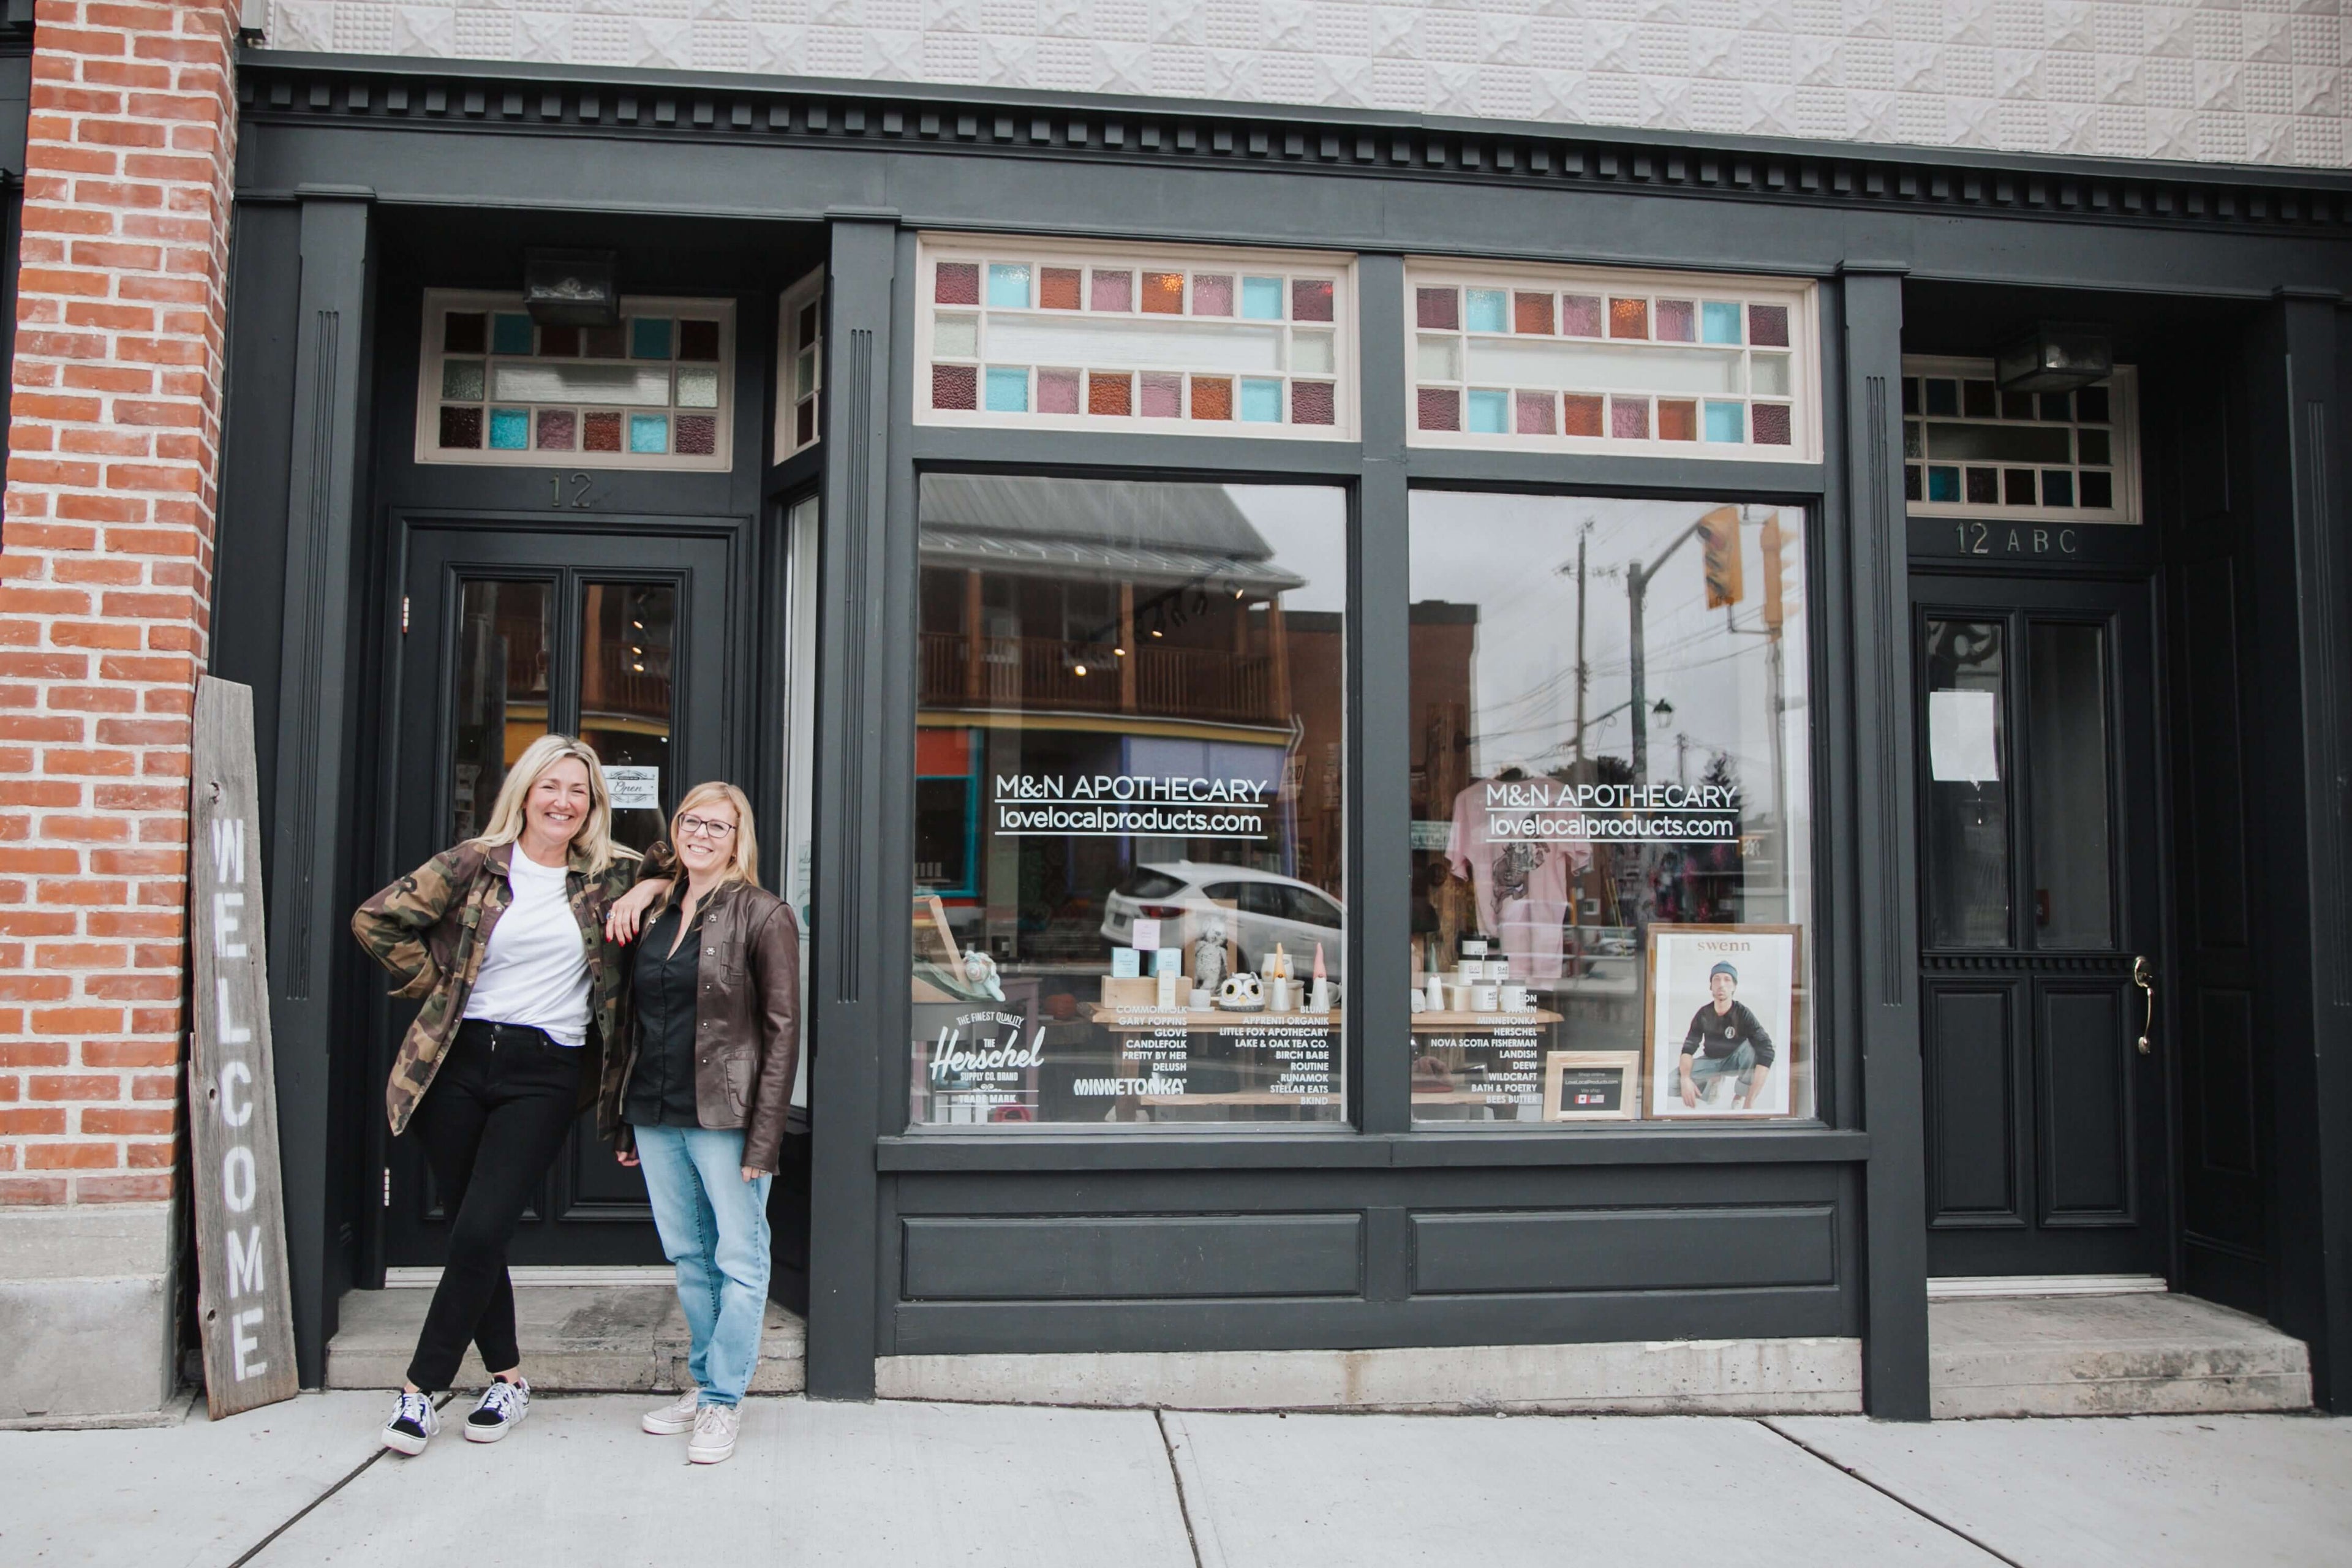 Love Local Products storefront  M&N Apothecary windows with Vans Herschel Blume Wildcraft Nancy Overbury and Margaret Thouez in front